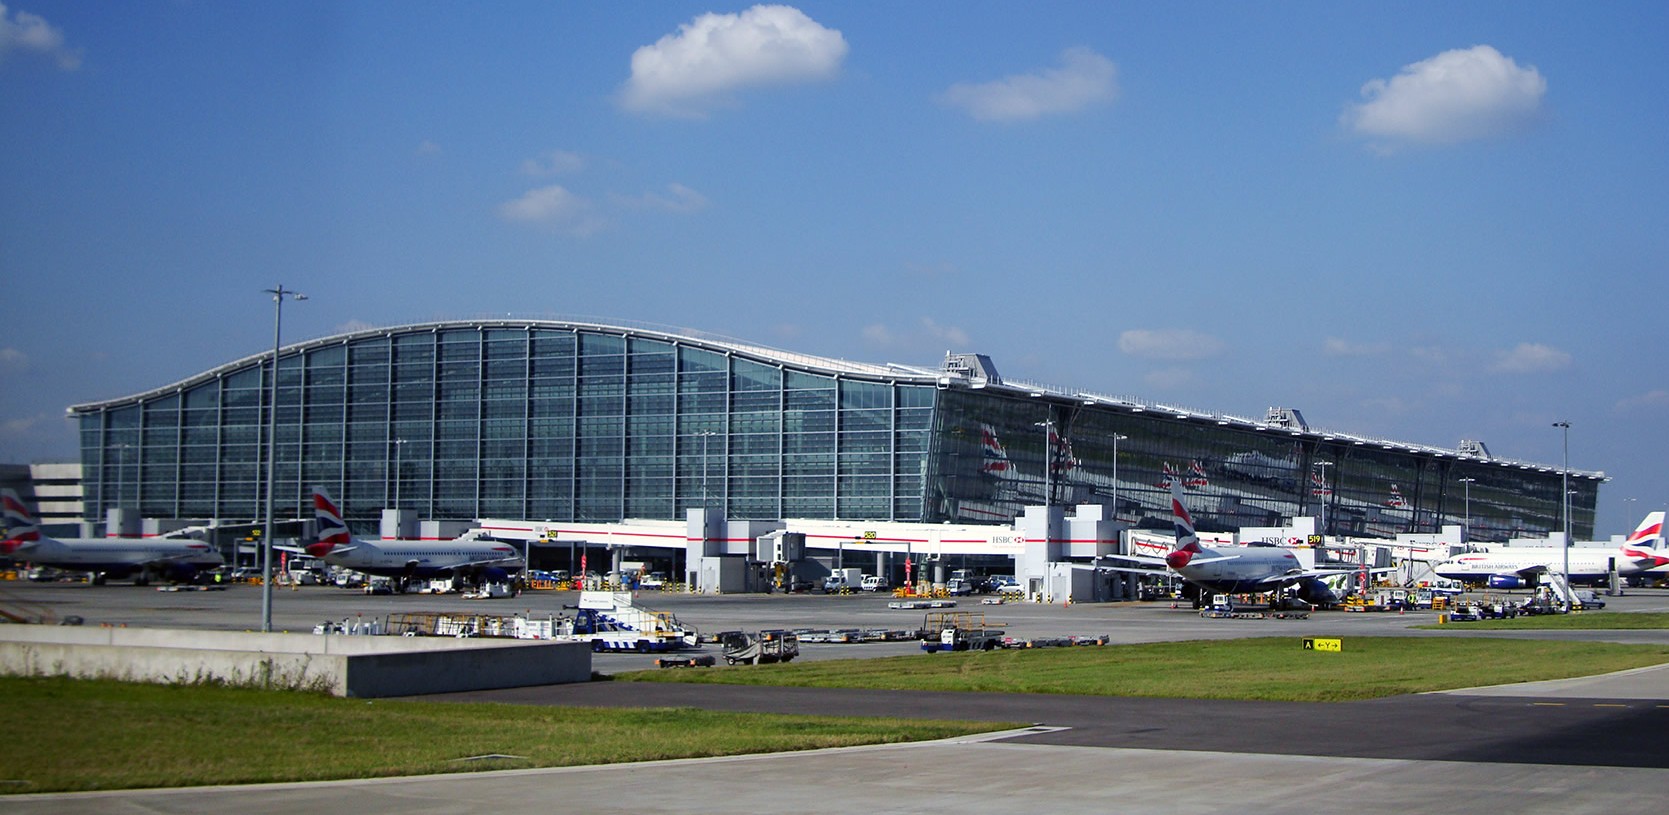 "Heathrow T5" by Warren Rohner - Flickr. Licensed under CC BY-SA 2.0 via Wikimedia Commons.